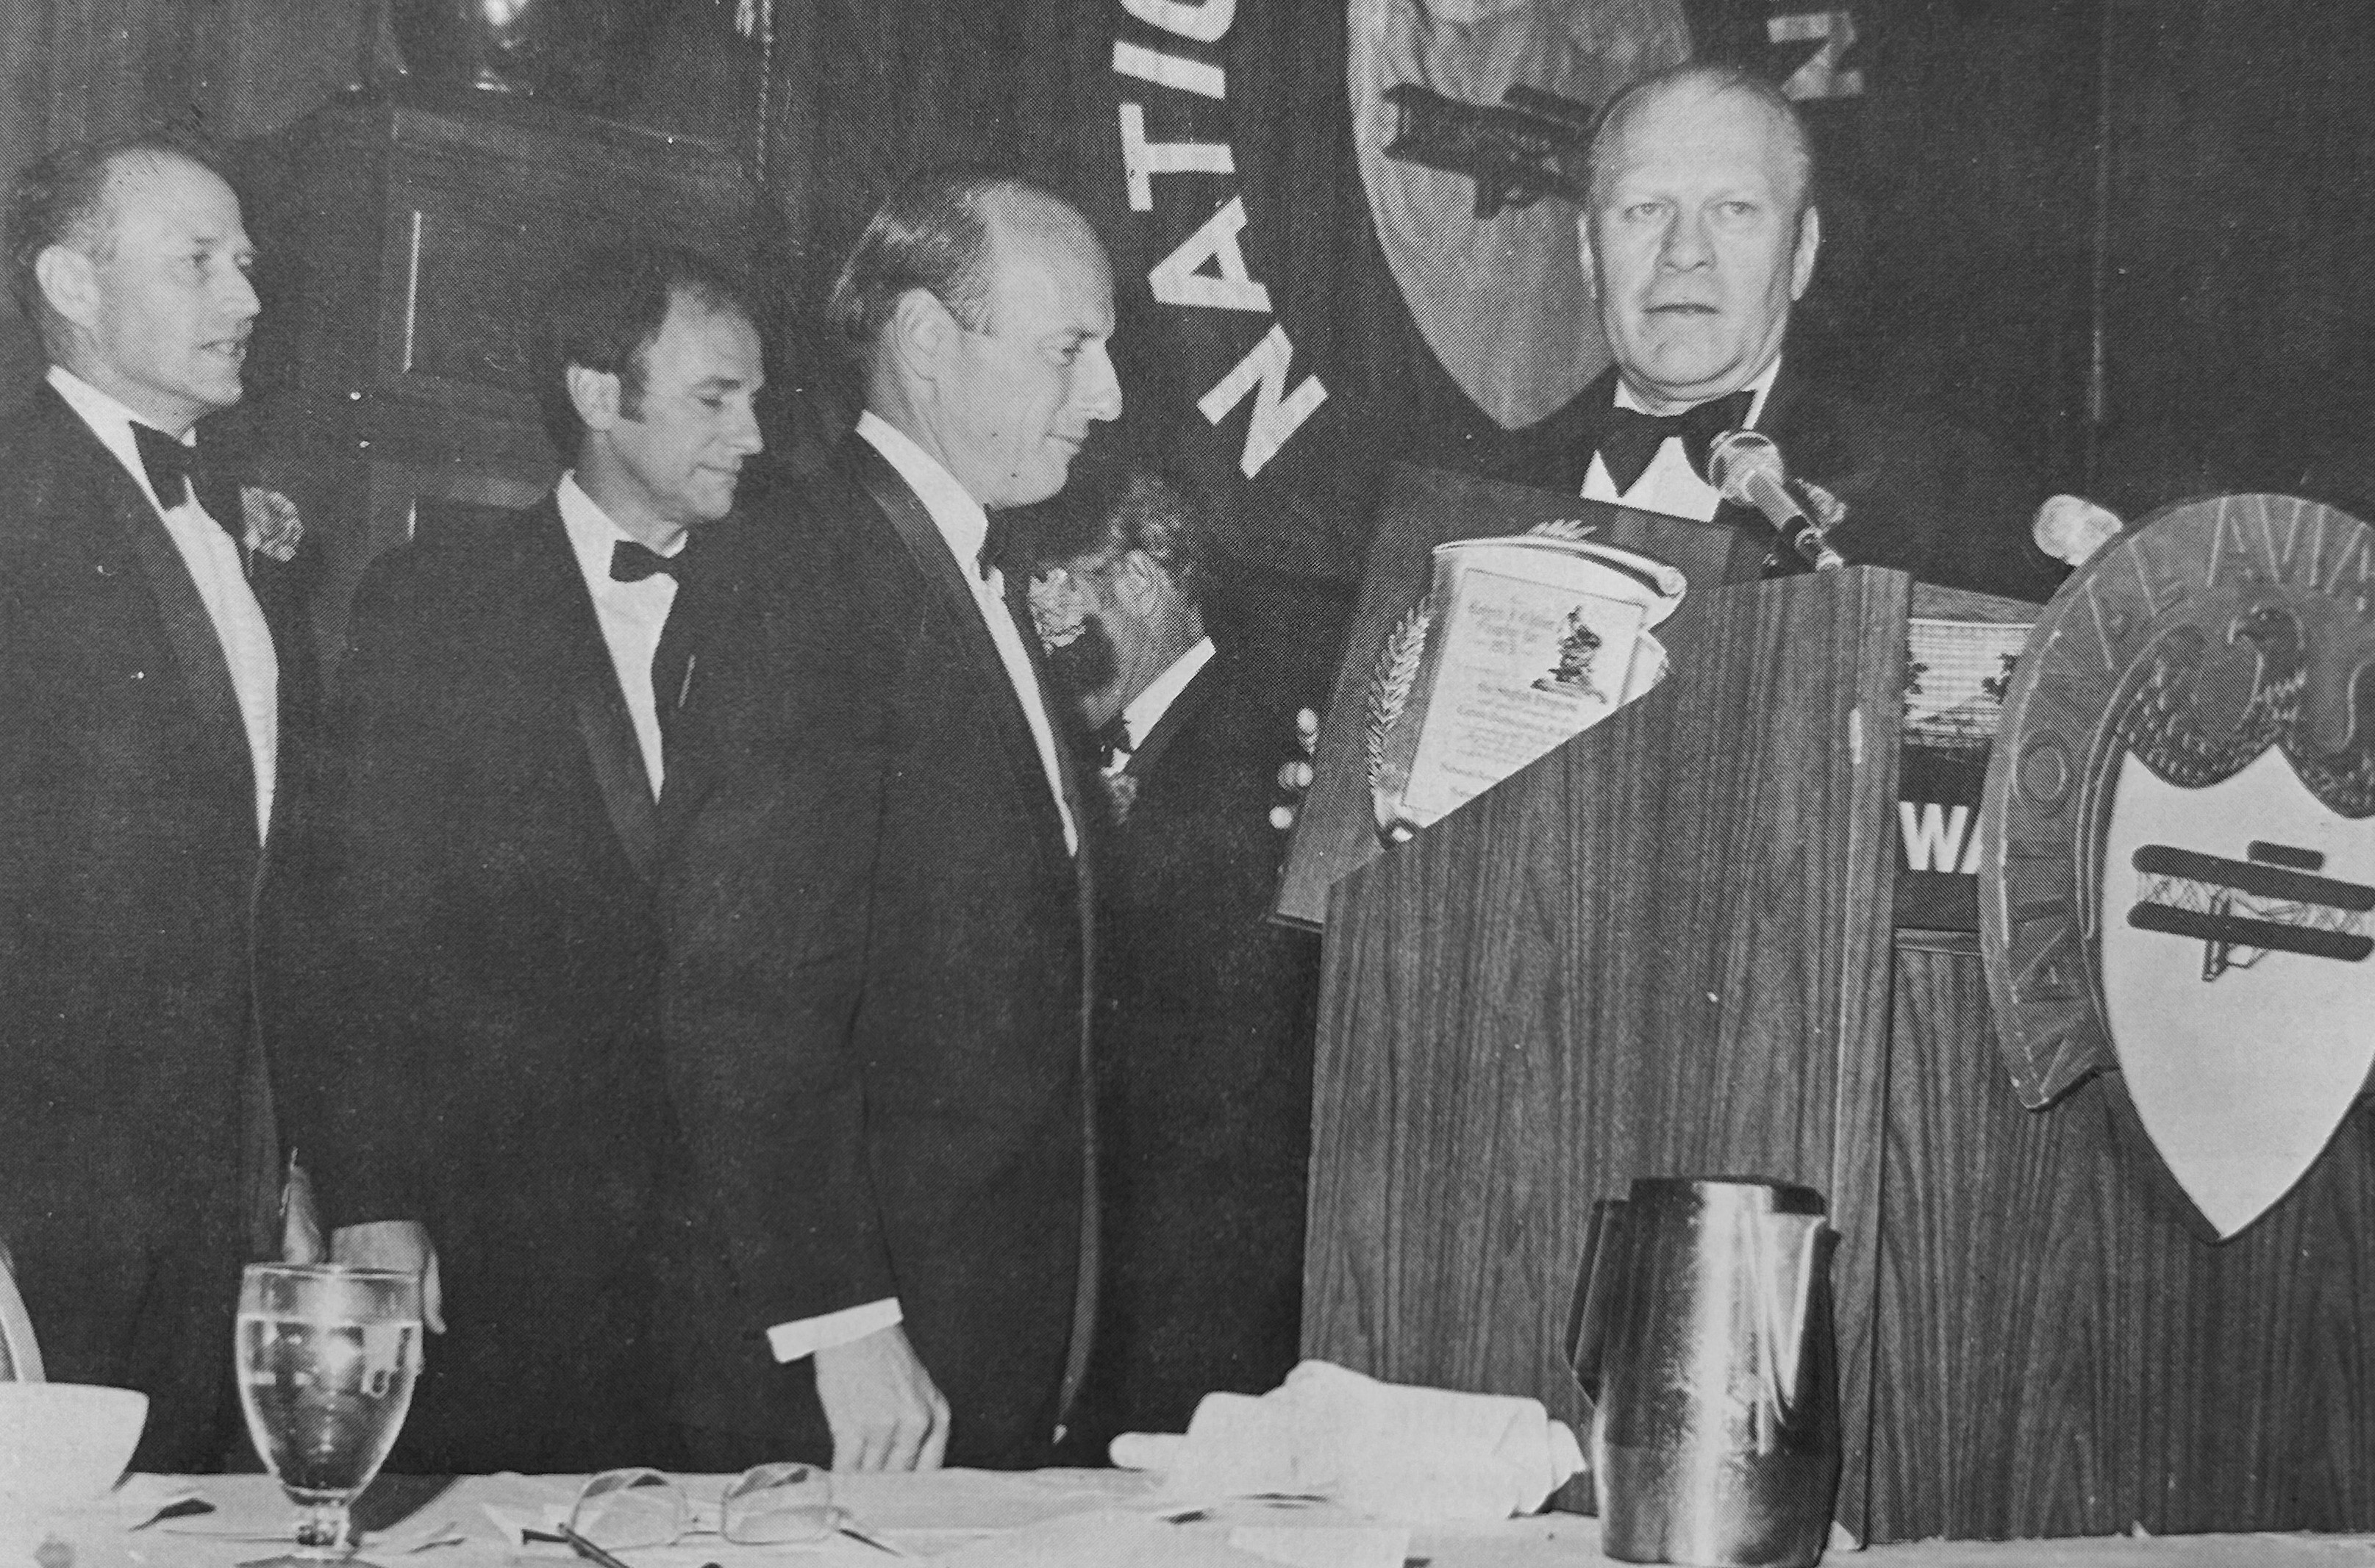 Skylab 2 Commander Charles “Pete” Conrad, center, accepts the Collier Trophy from Vice President Gerald R. Ford, right, as Skylab 4 Commander Gerald P. Carr, left, and Skylab 3 Commander Alan L. Bean look on